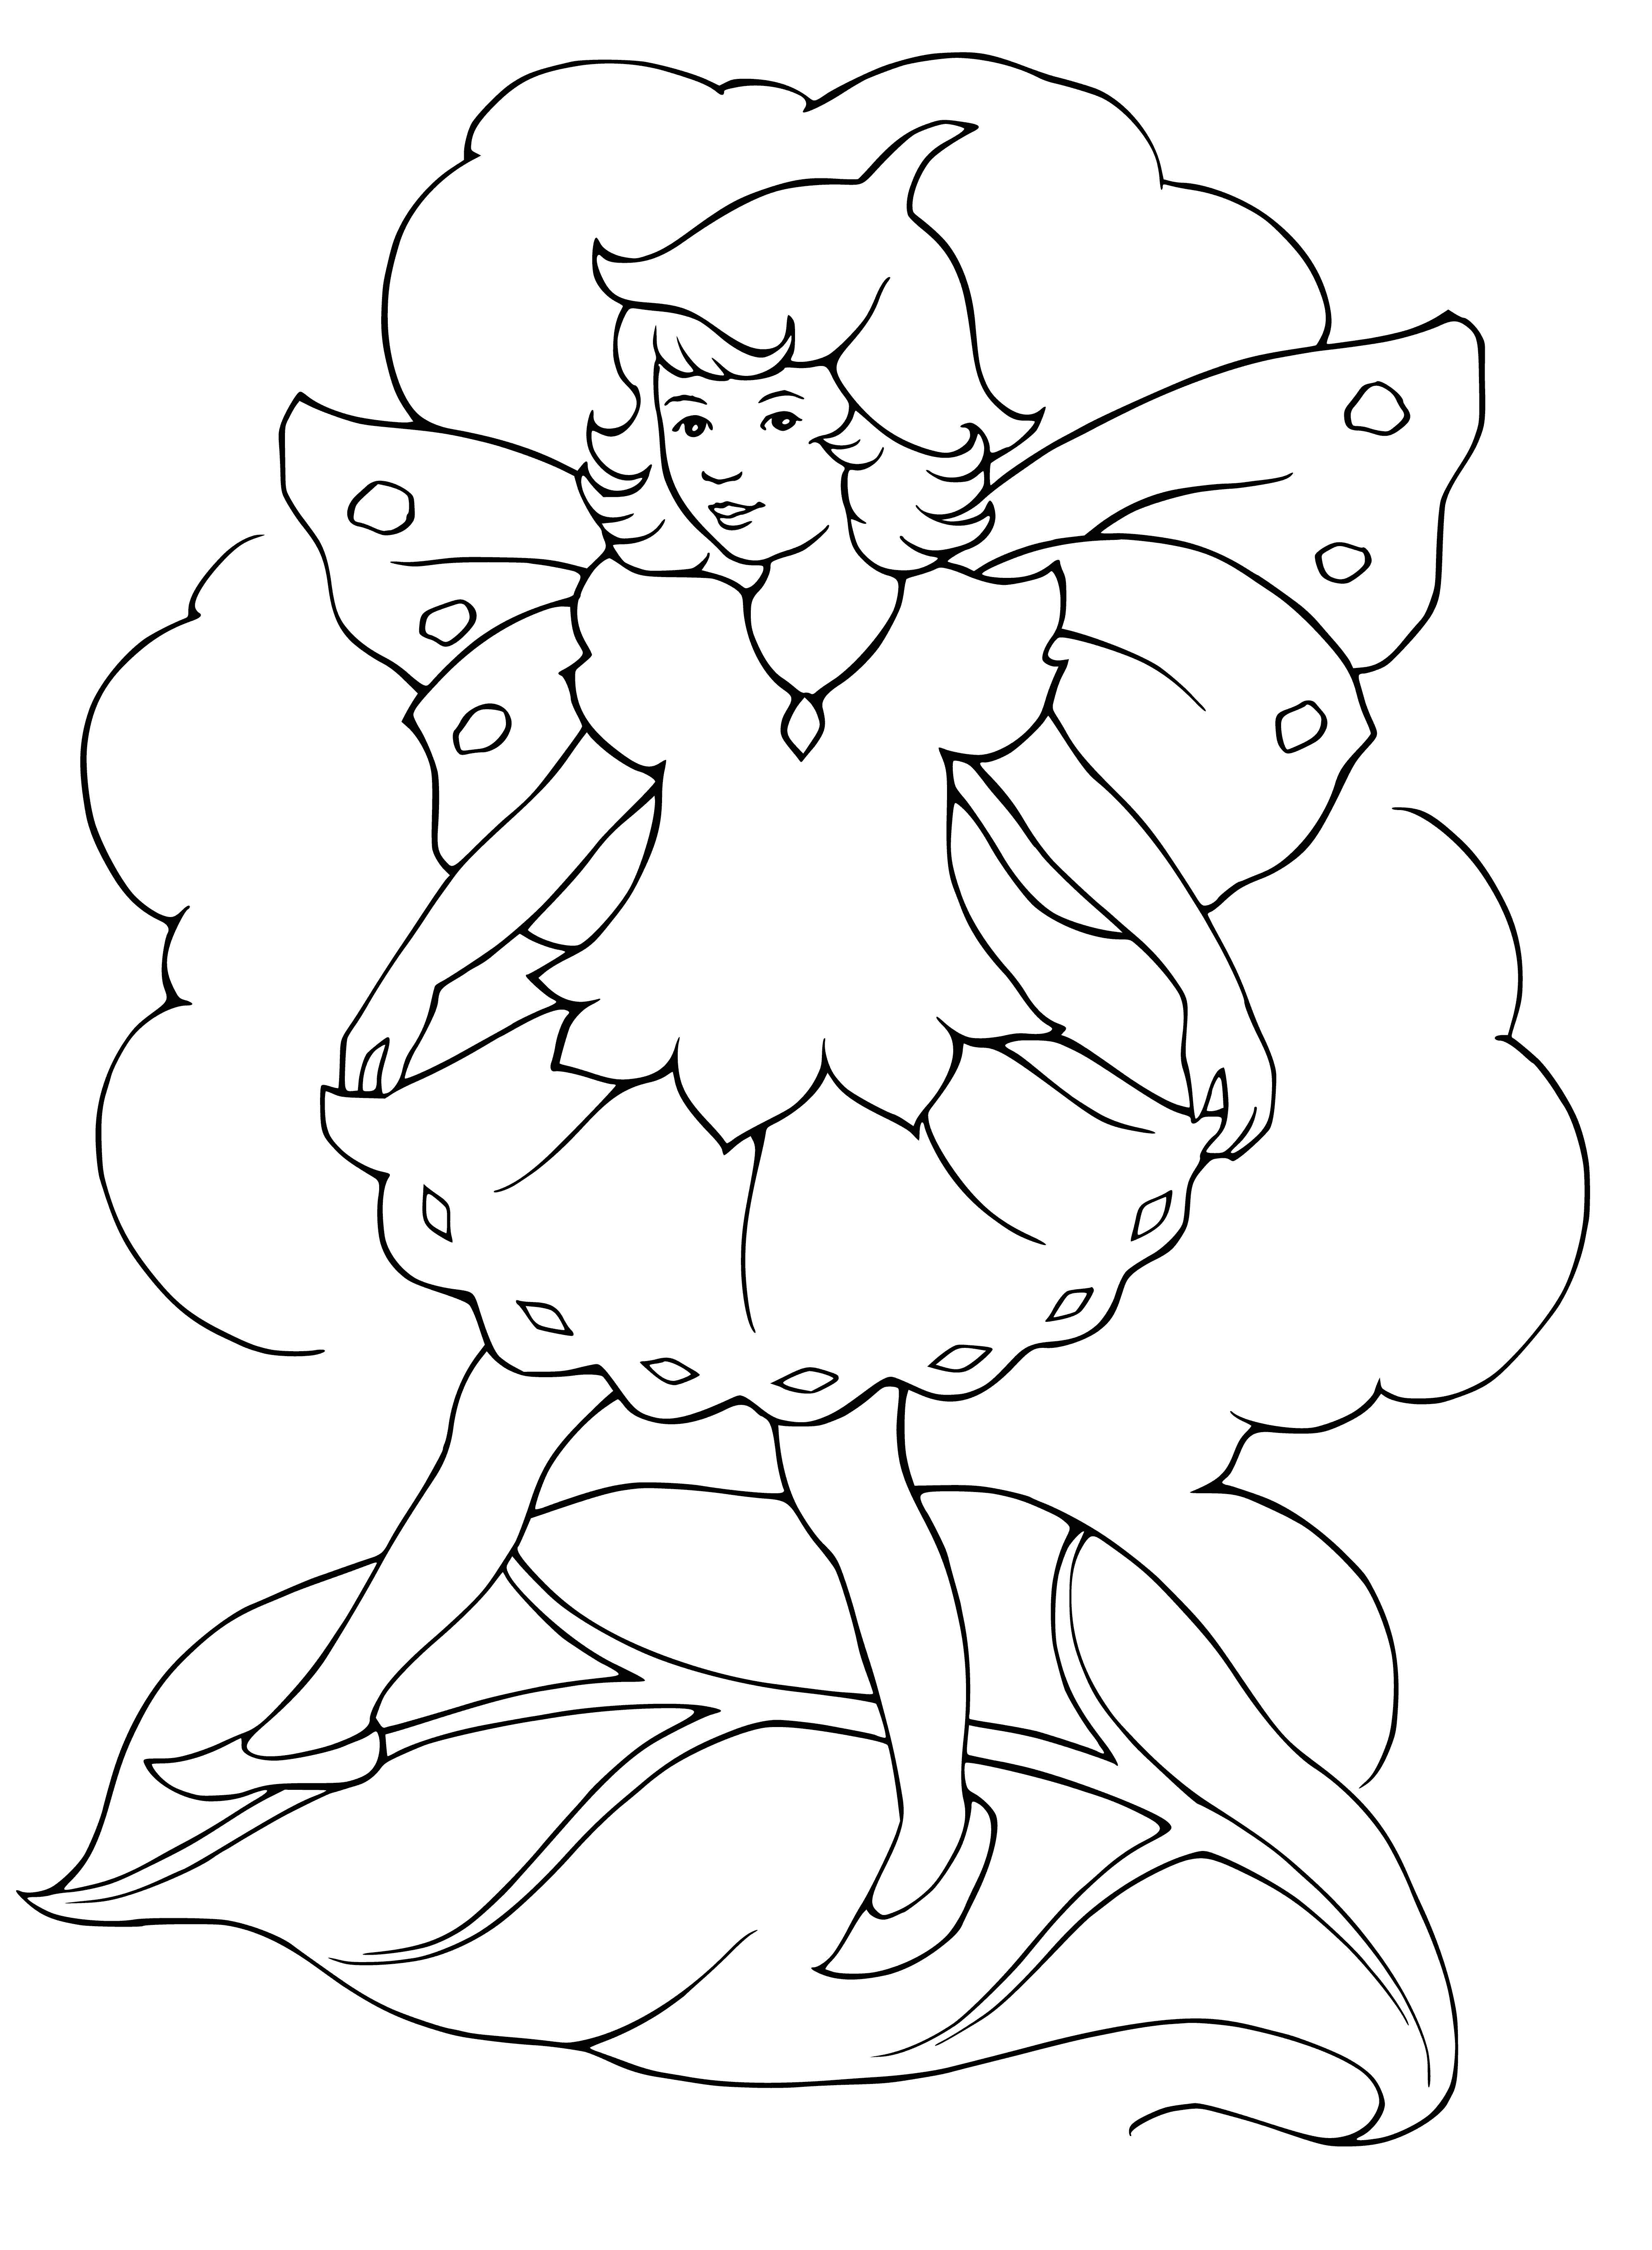 Fairy girl dancing on a leaf coloring page